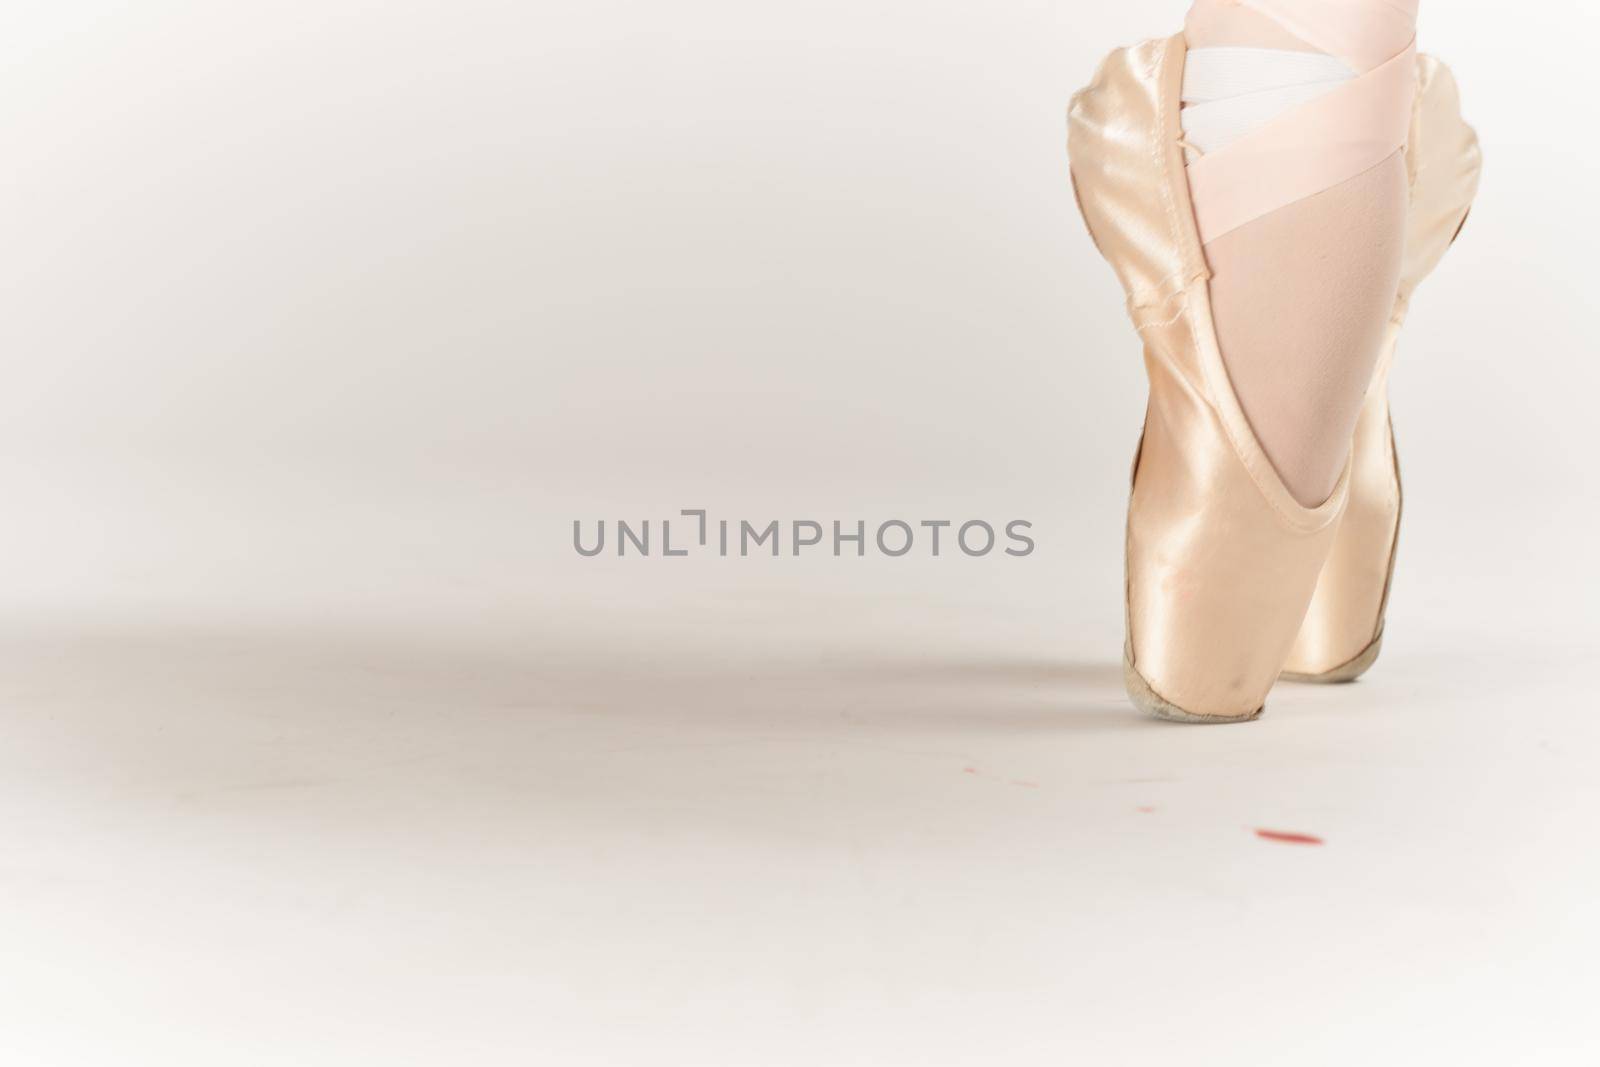 ballerina feet dance performed classical style light background by Vichizh